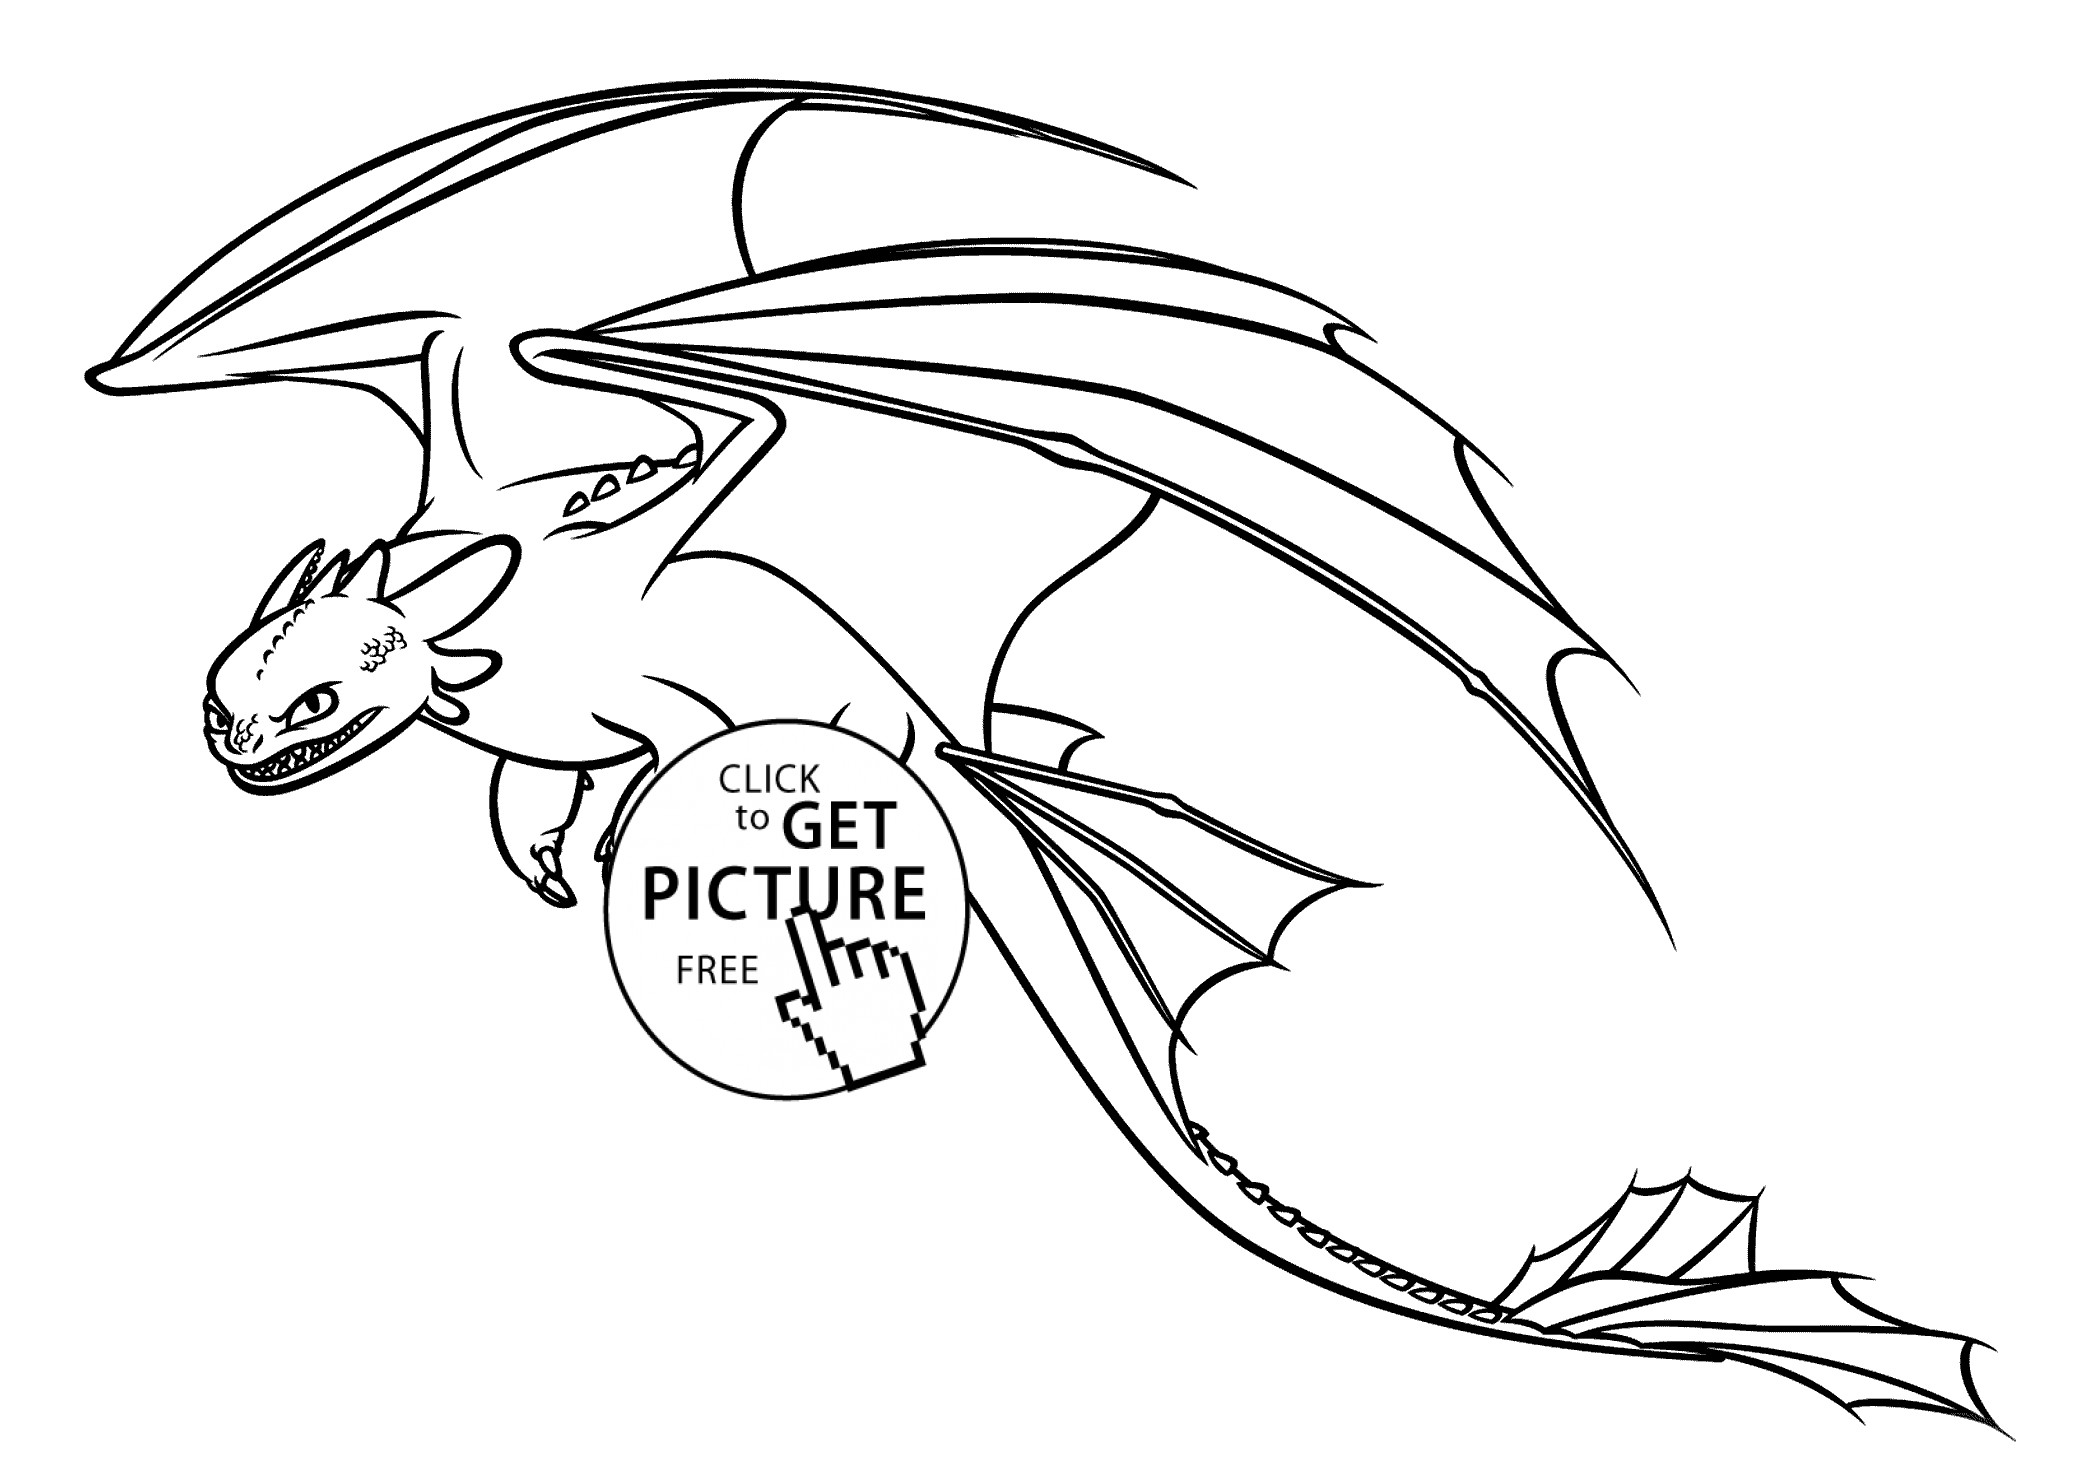 Toothless Coloring Pages at GetColorings.com | Free printable colorings